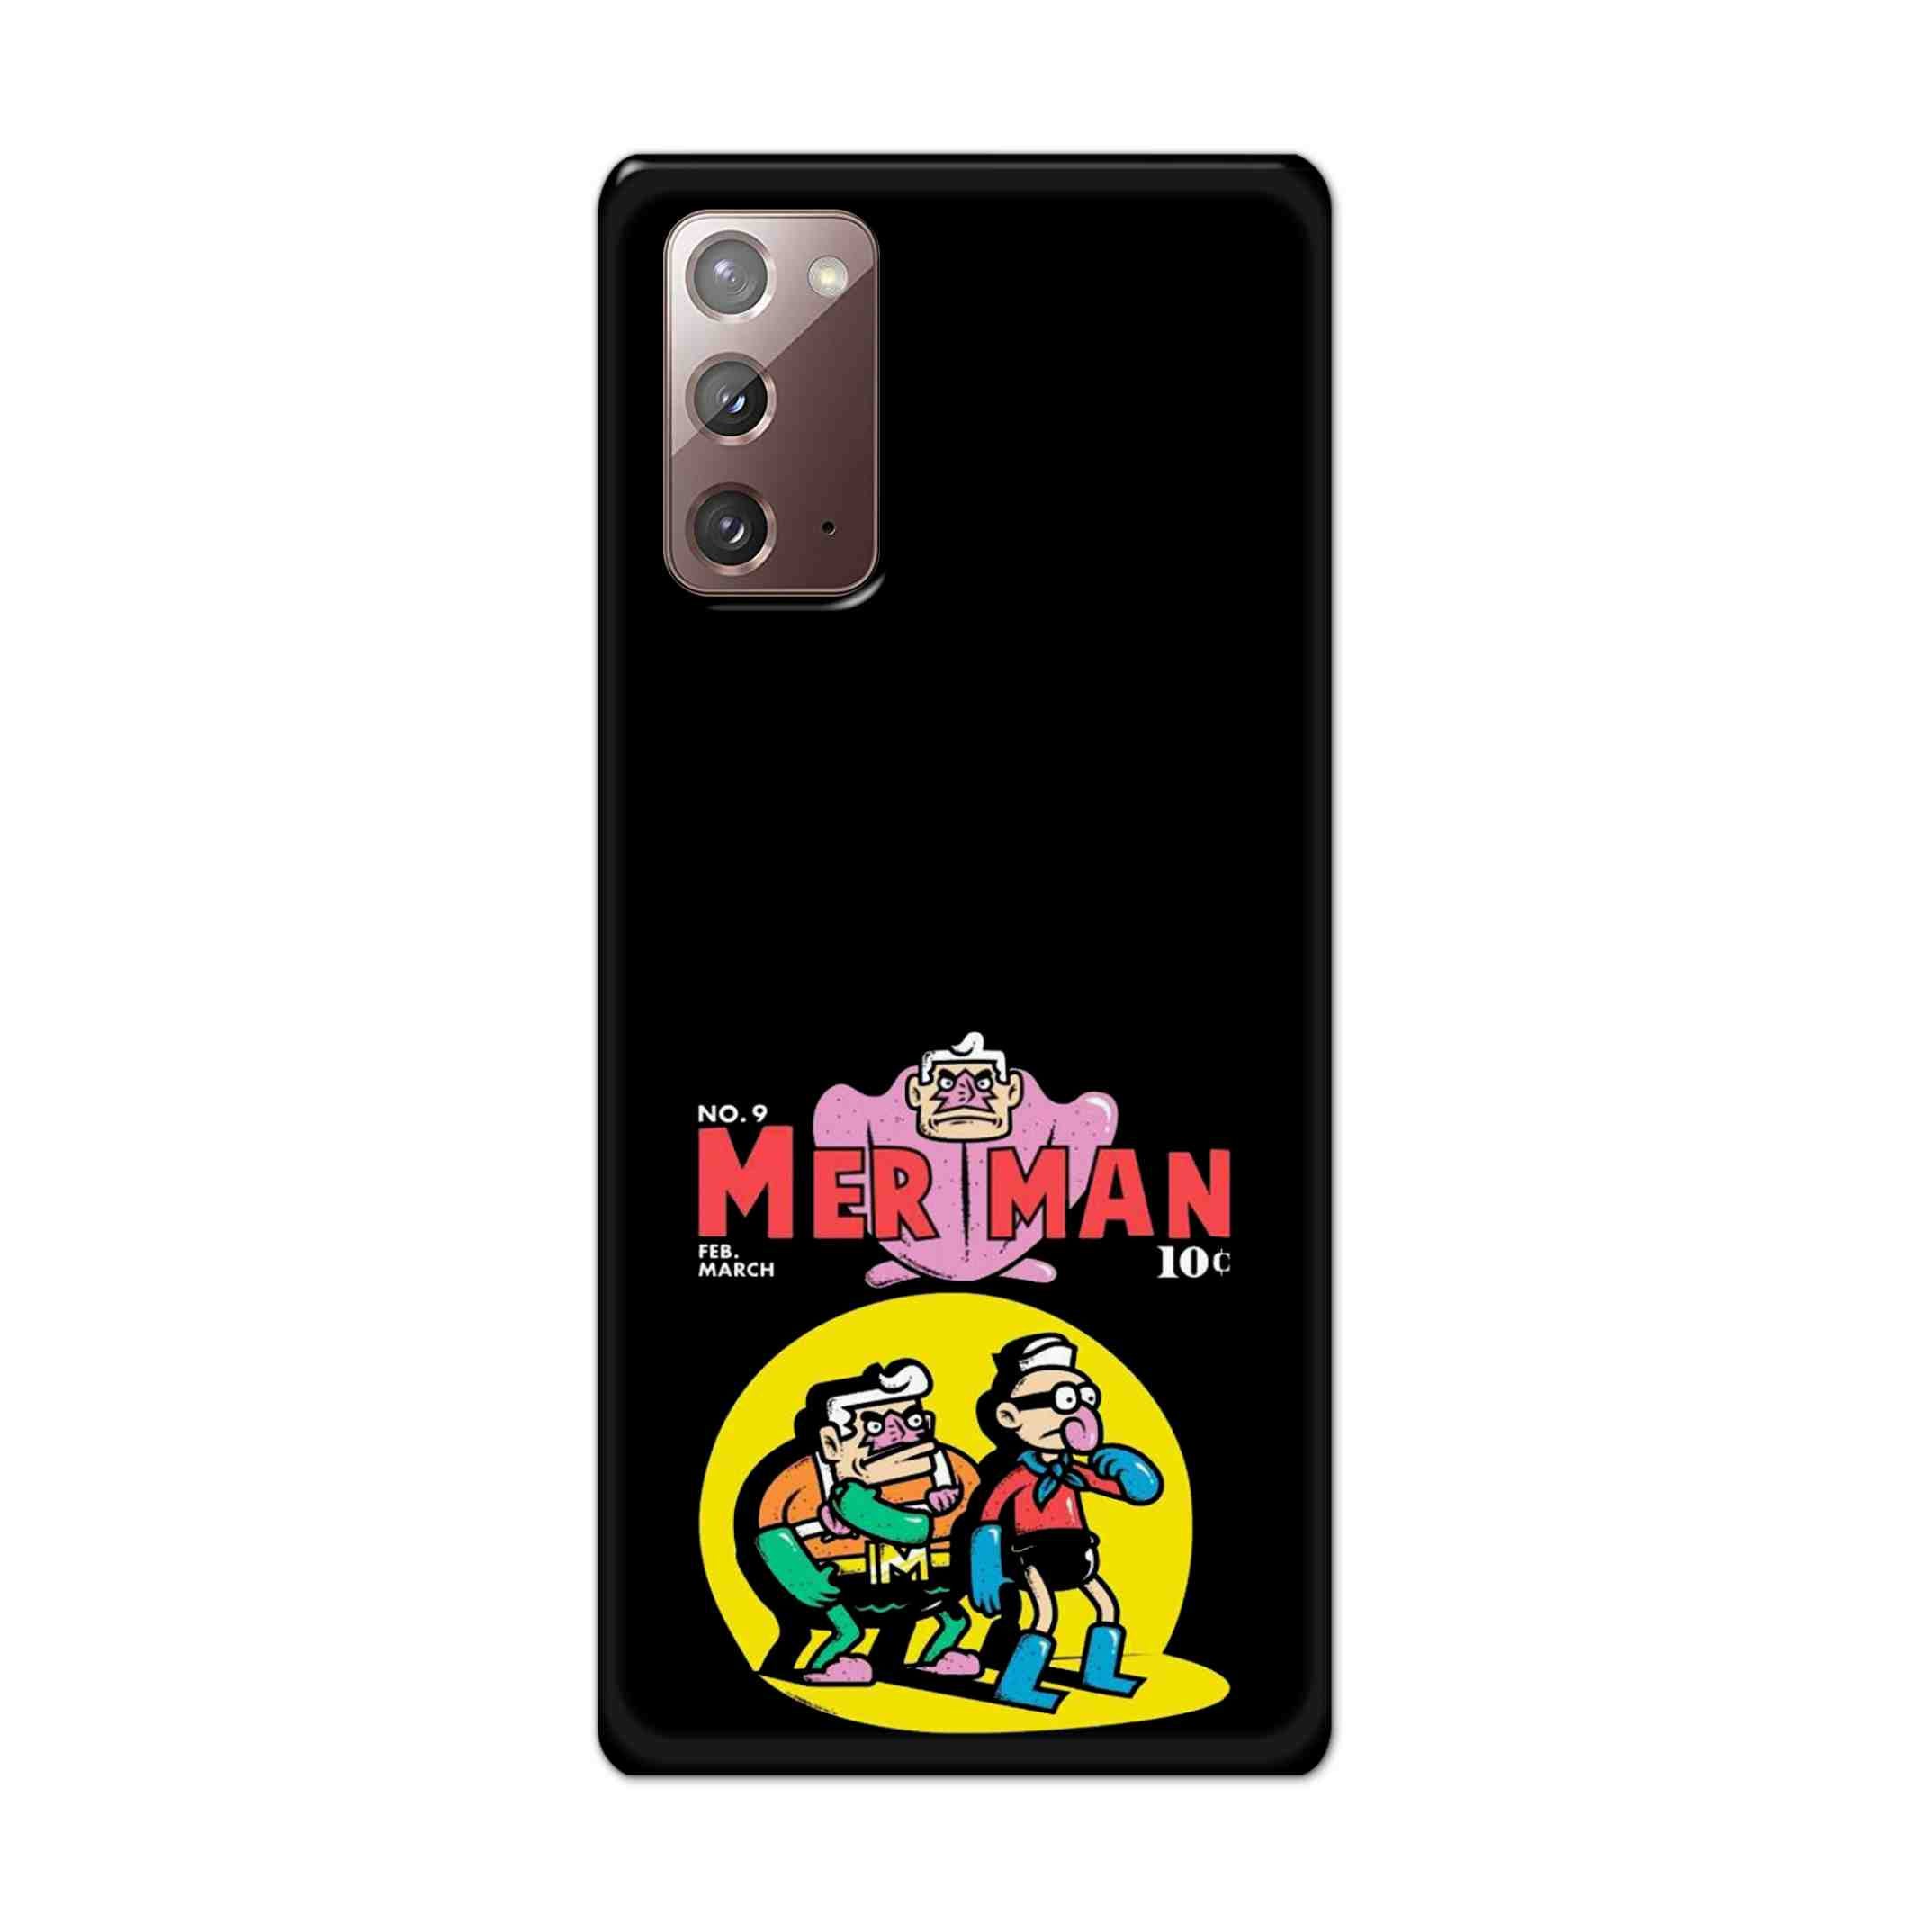 Buy Merman Hard Back Mobile Phone Case Cover For Samsung Galaxy Note 20 Online